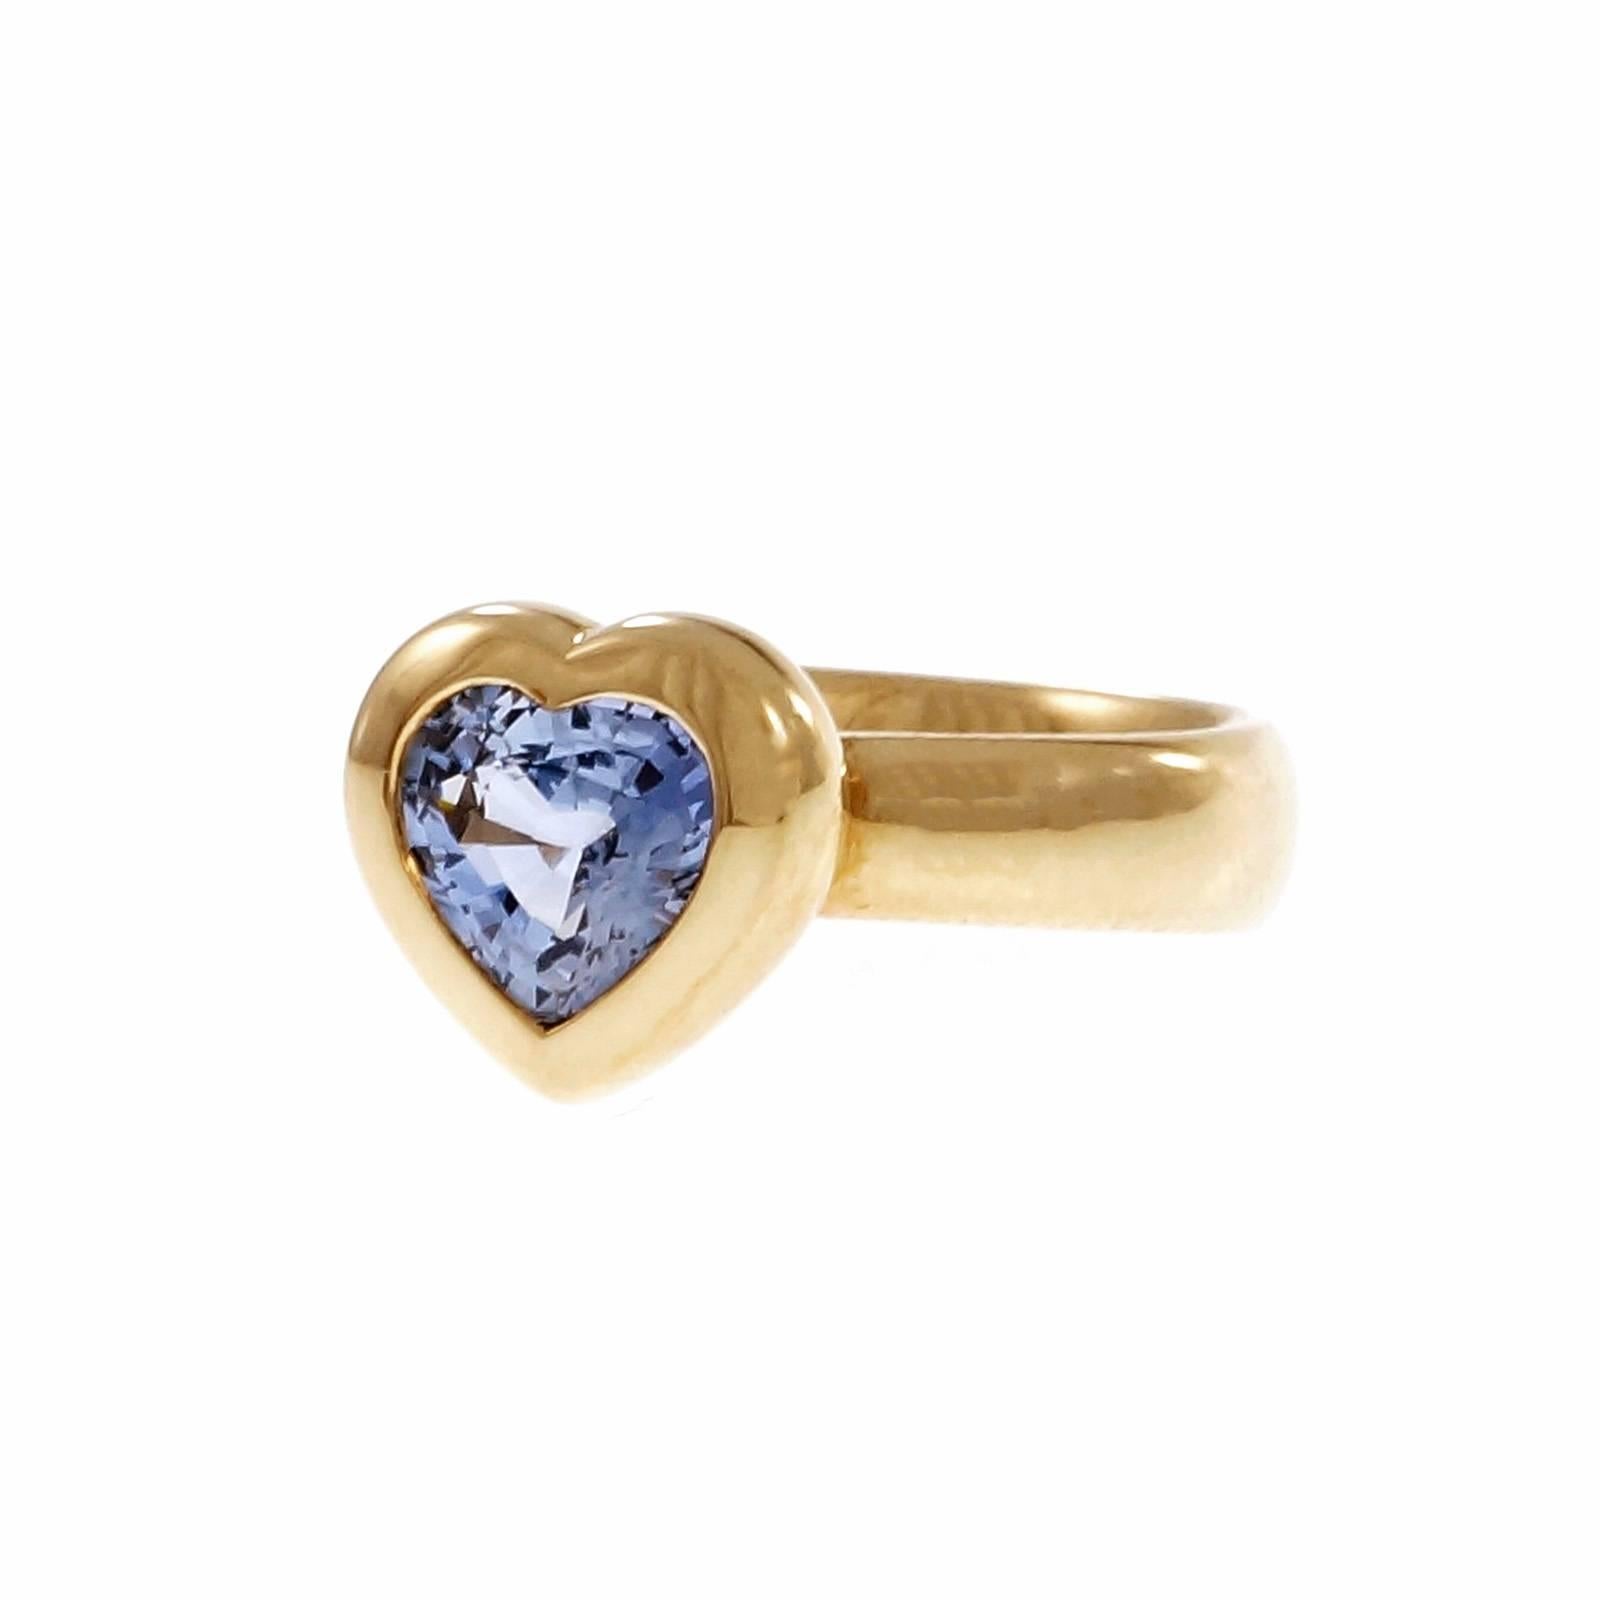 Tiffany & Co bright medium blue Sapphire solid 18k yellow gold heart shape ring. Bright periwinkle color.

1 heart shaped bright medium blue Sapphire, approx. total weight 1.50cts, heated, 7.25 x 7.20 x 3.90mm, natural corundum simple heat only,